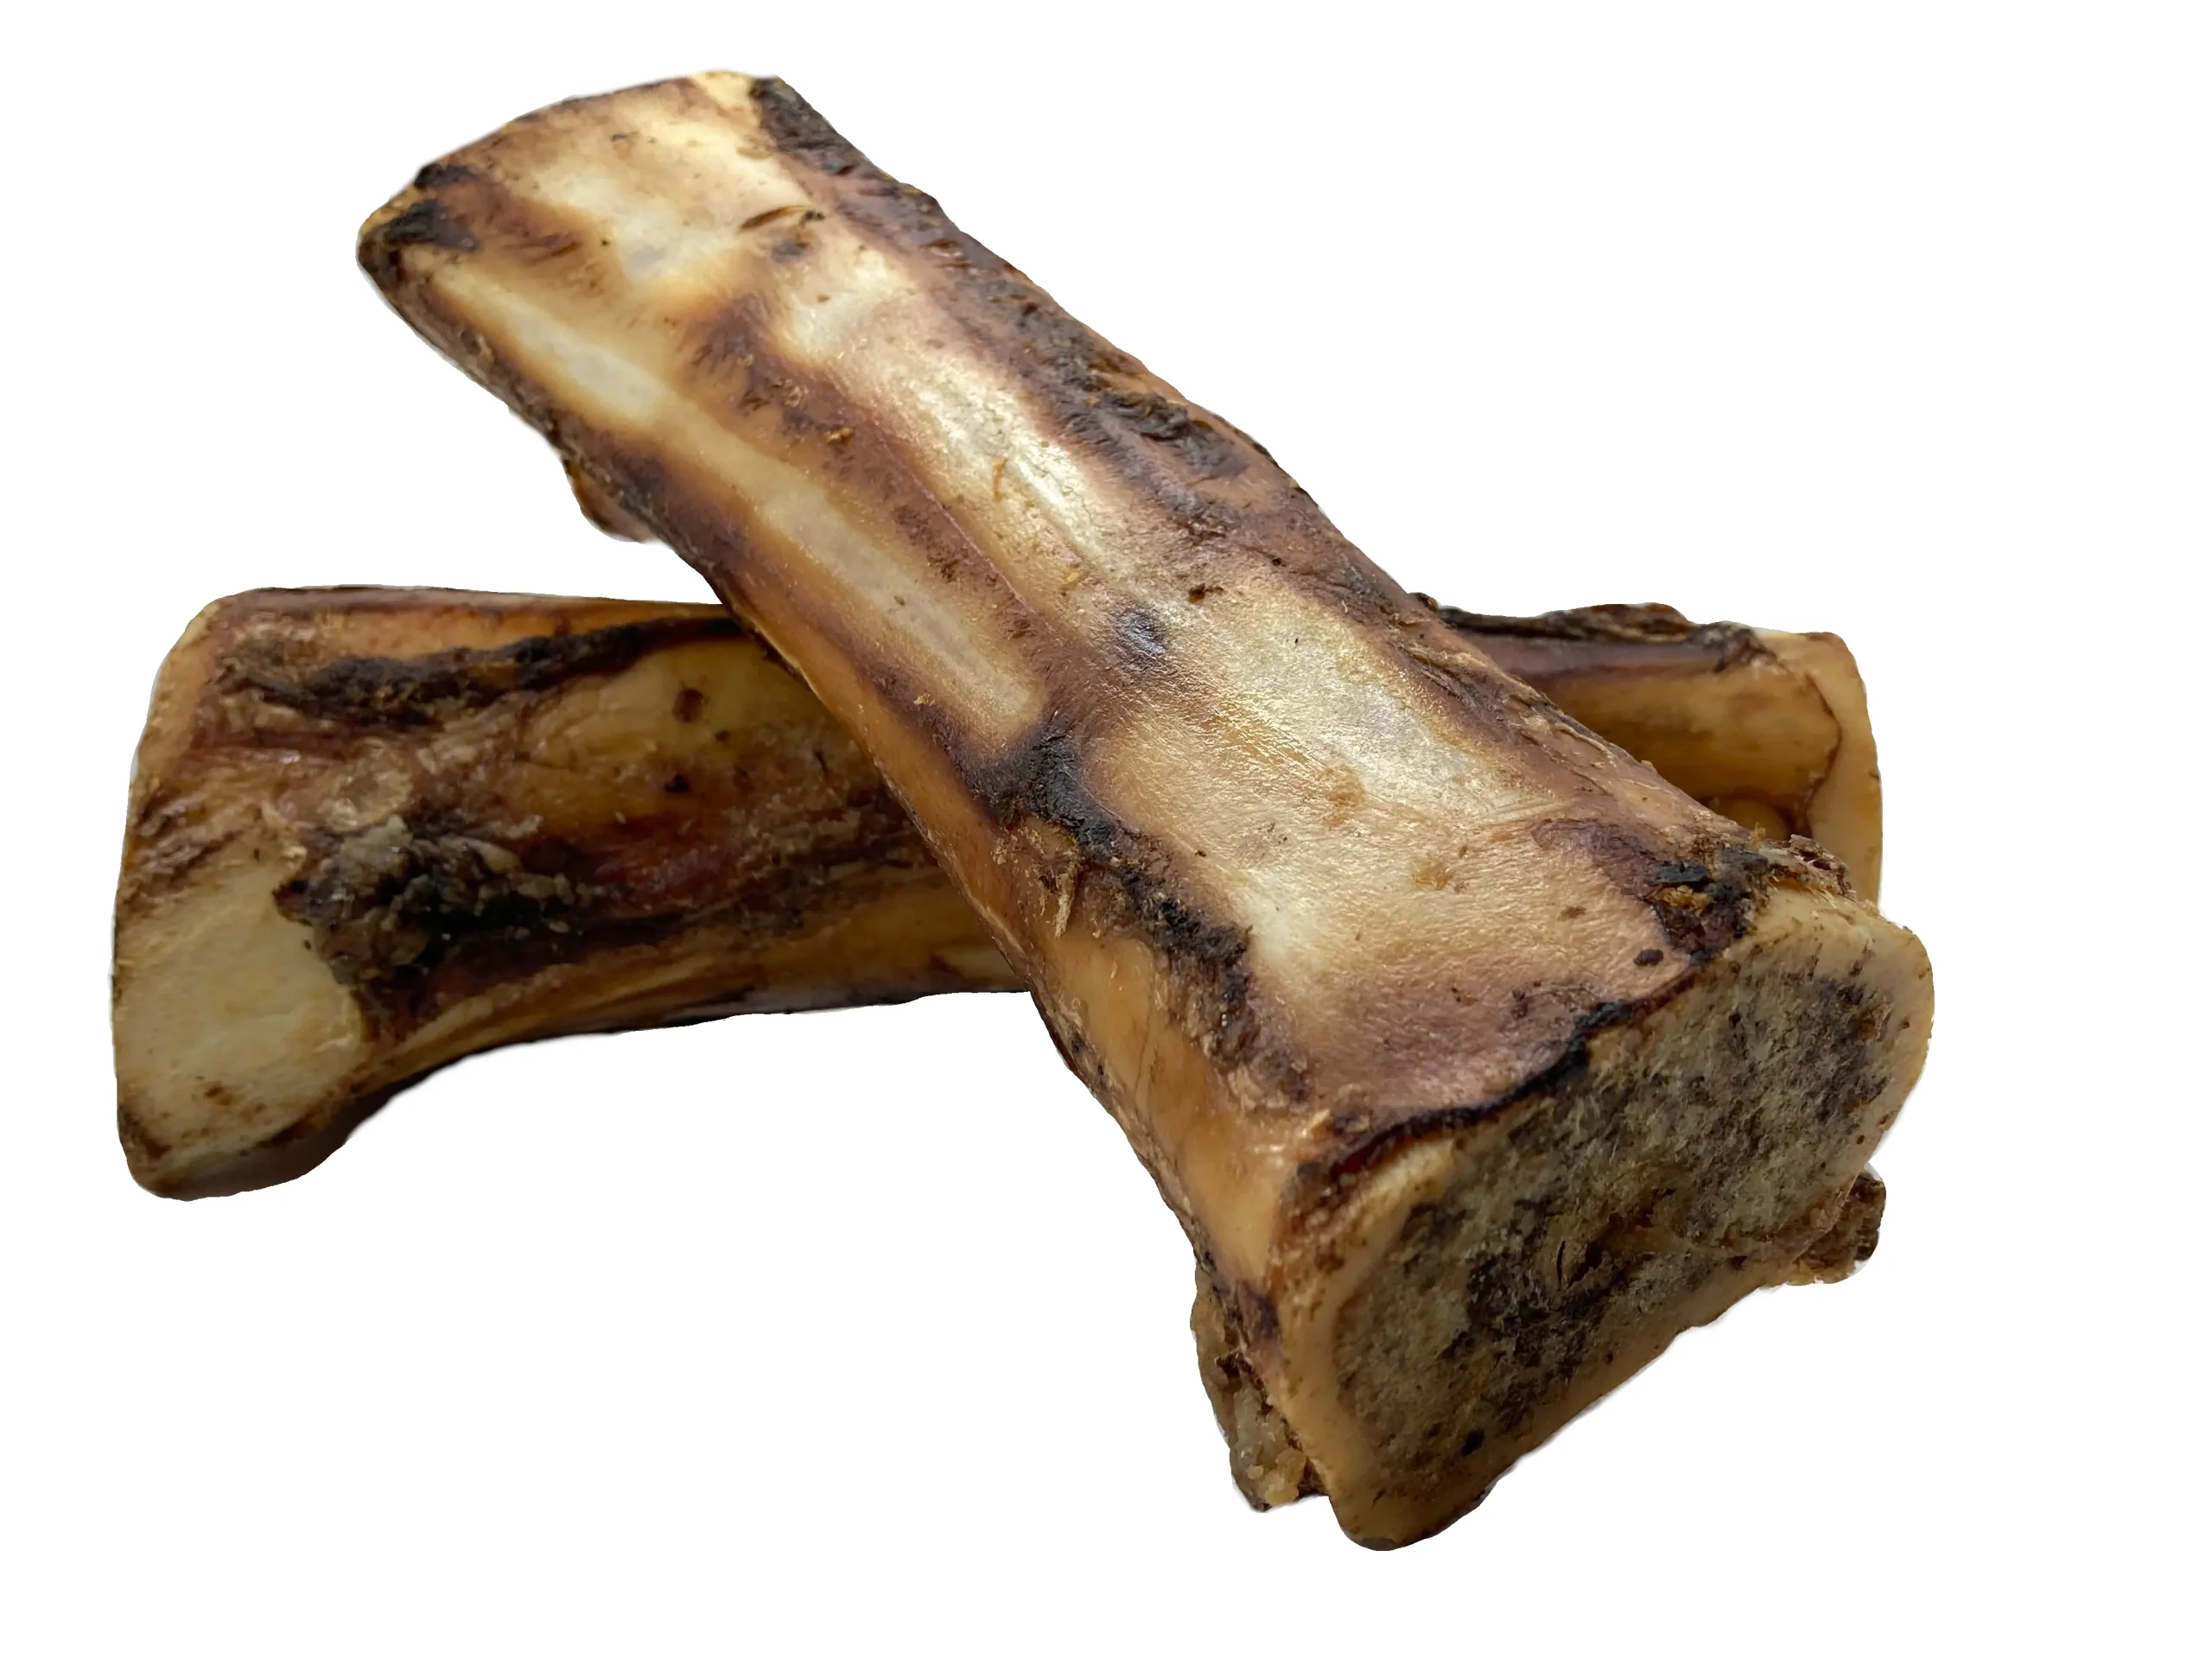 smoked beef bones for dogs - Are any beef bones safe for dogs